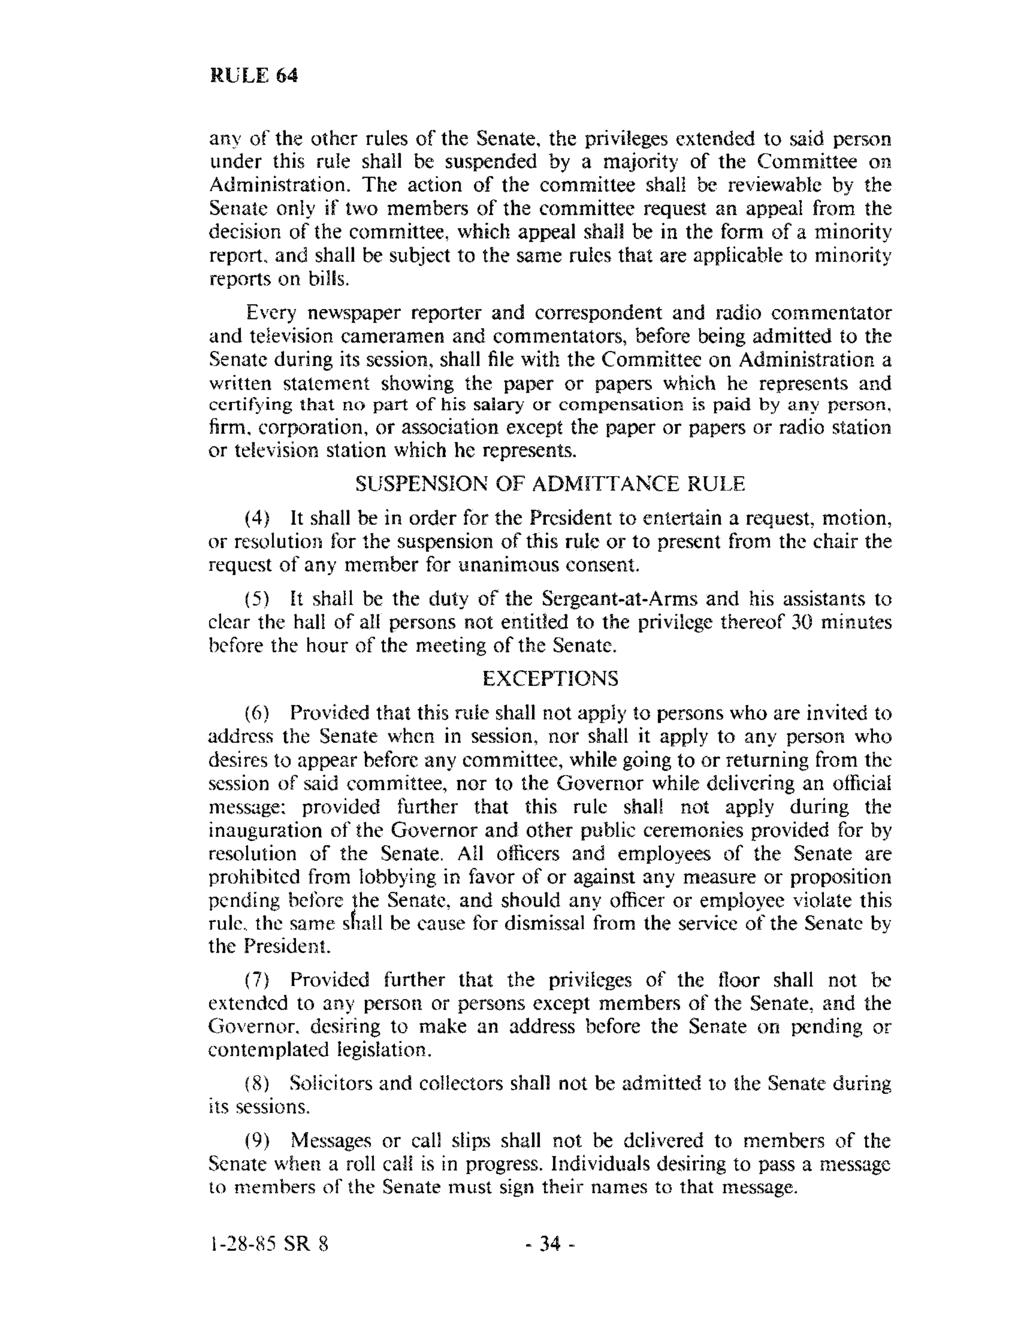 Case 2:13-cv-00193 Document 664-22 Filed in TXSD on 11/11/14 Page 38 of 140 RULE 110 any of the other rules of the Senate, the privileges extended to said person under this rule shall he suspended by